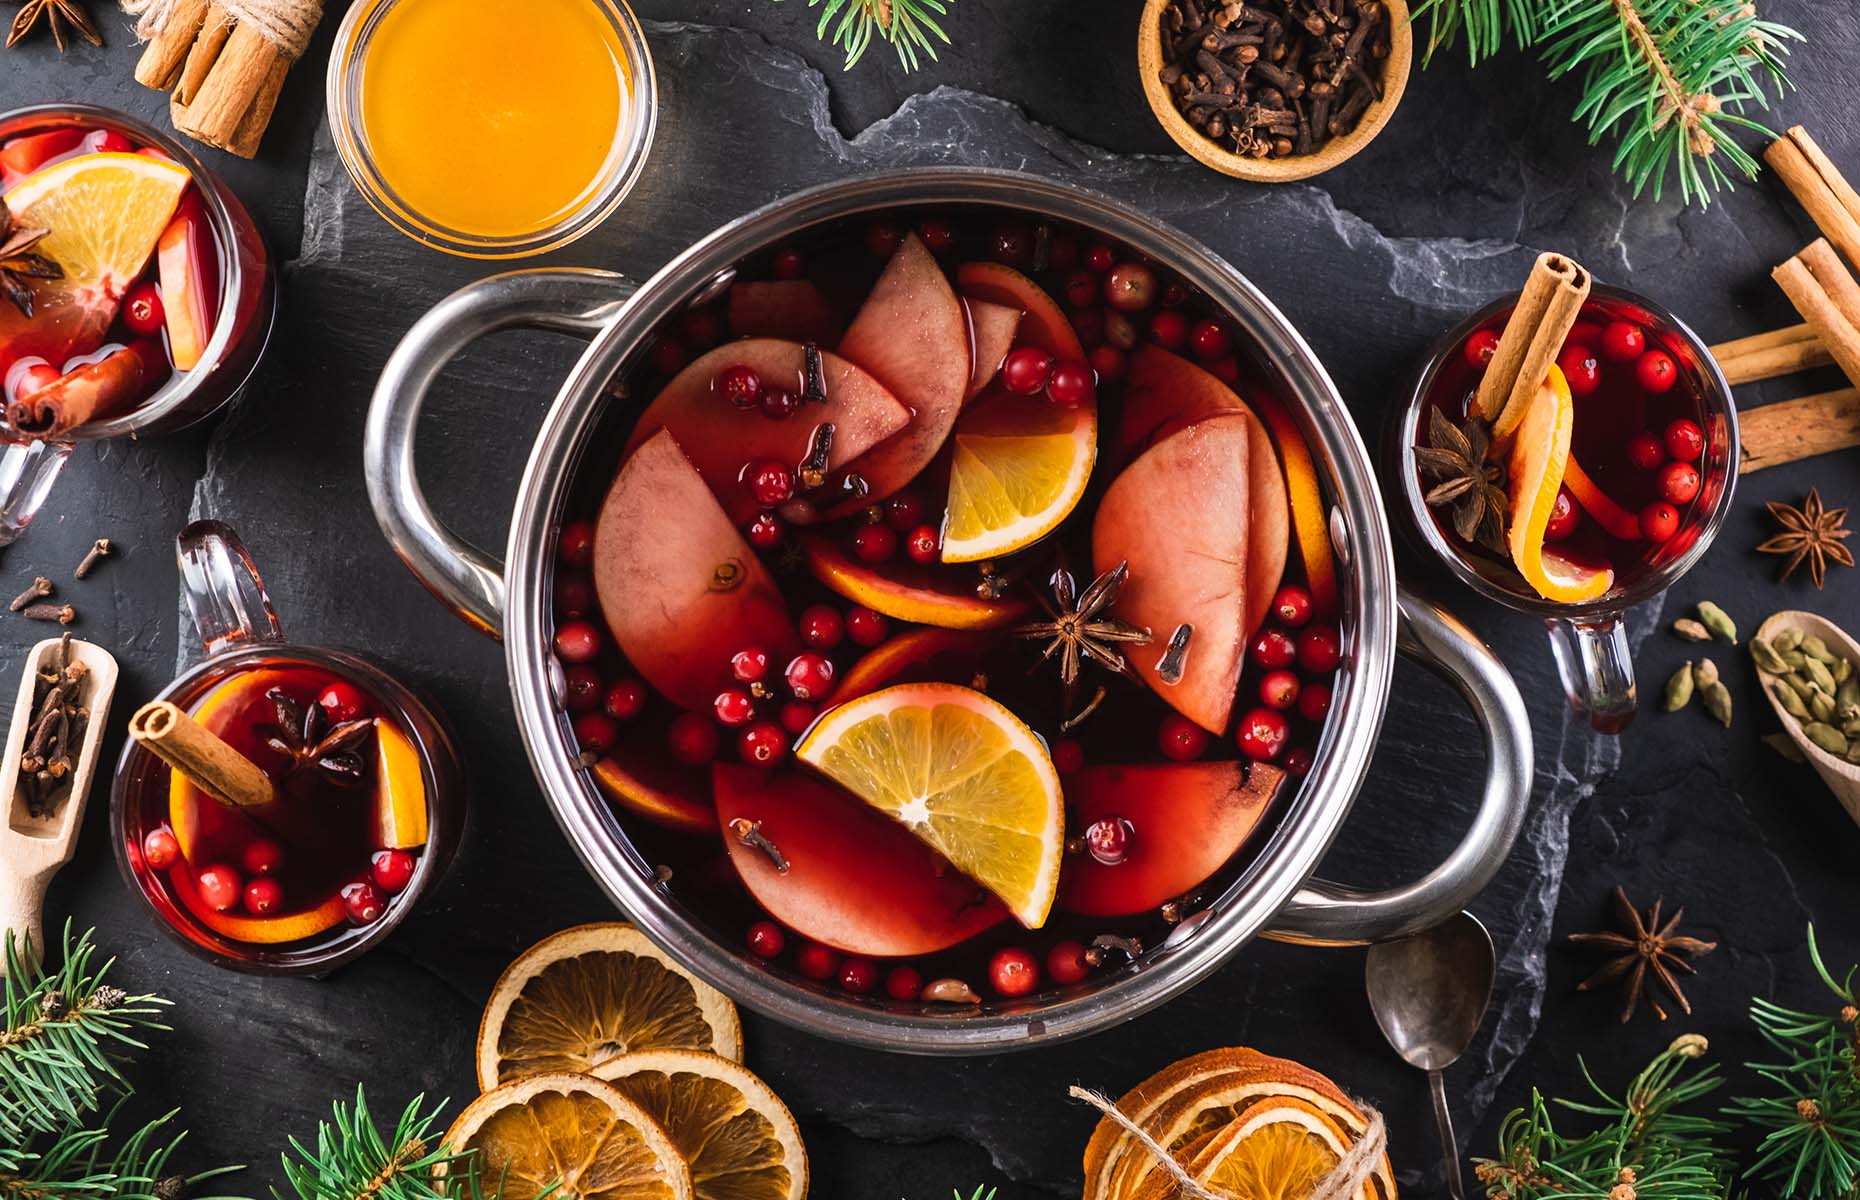 Making mulled wine at home in a pot (Image: GoncharukMaks/Shutterstock)